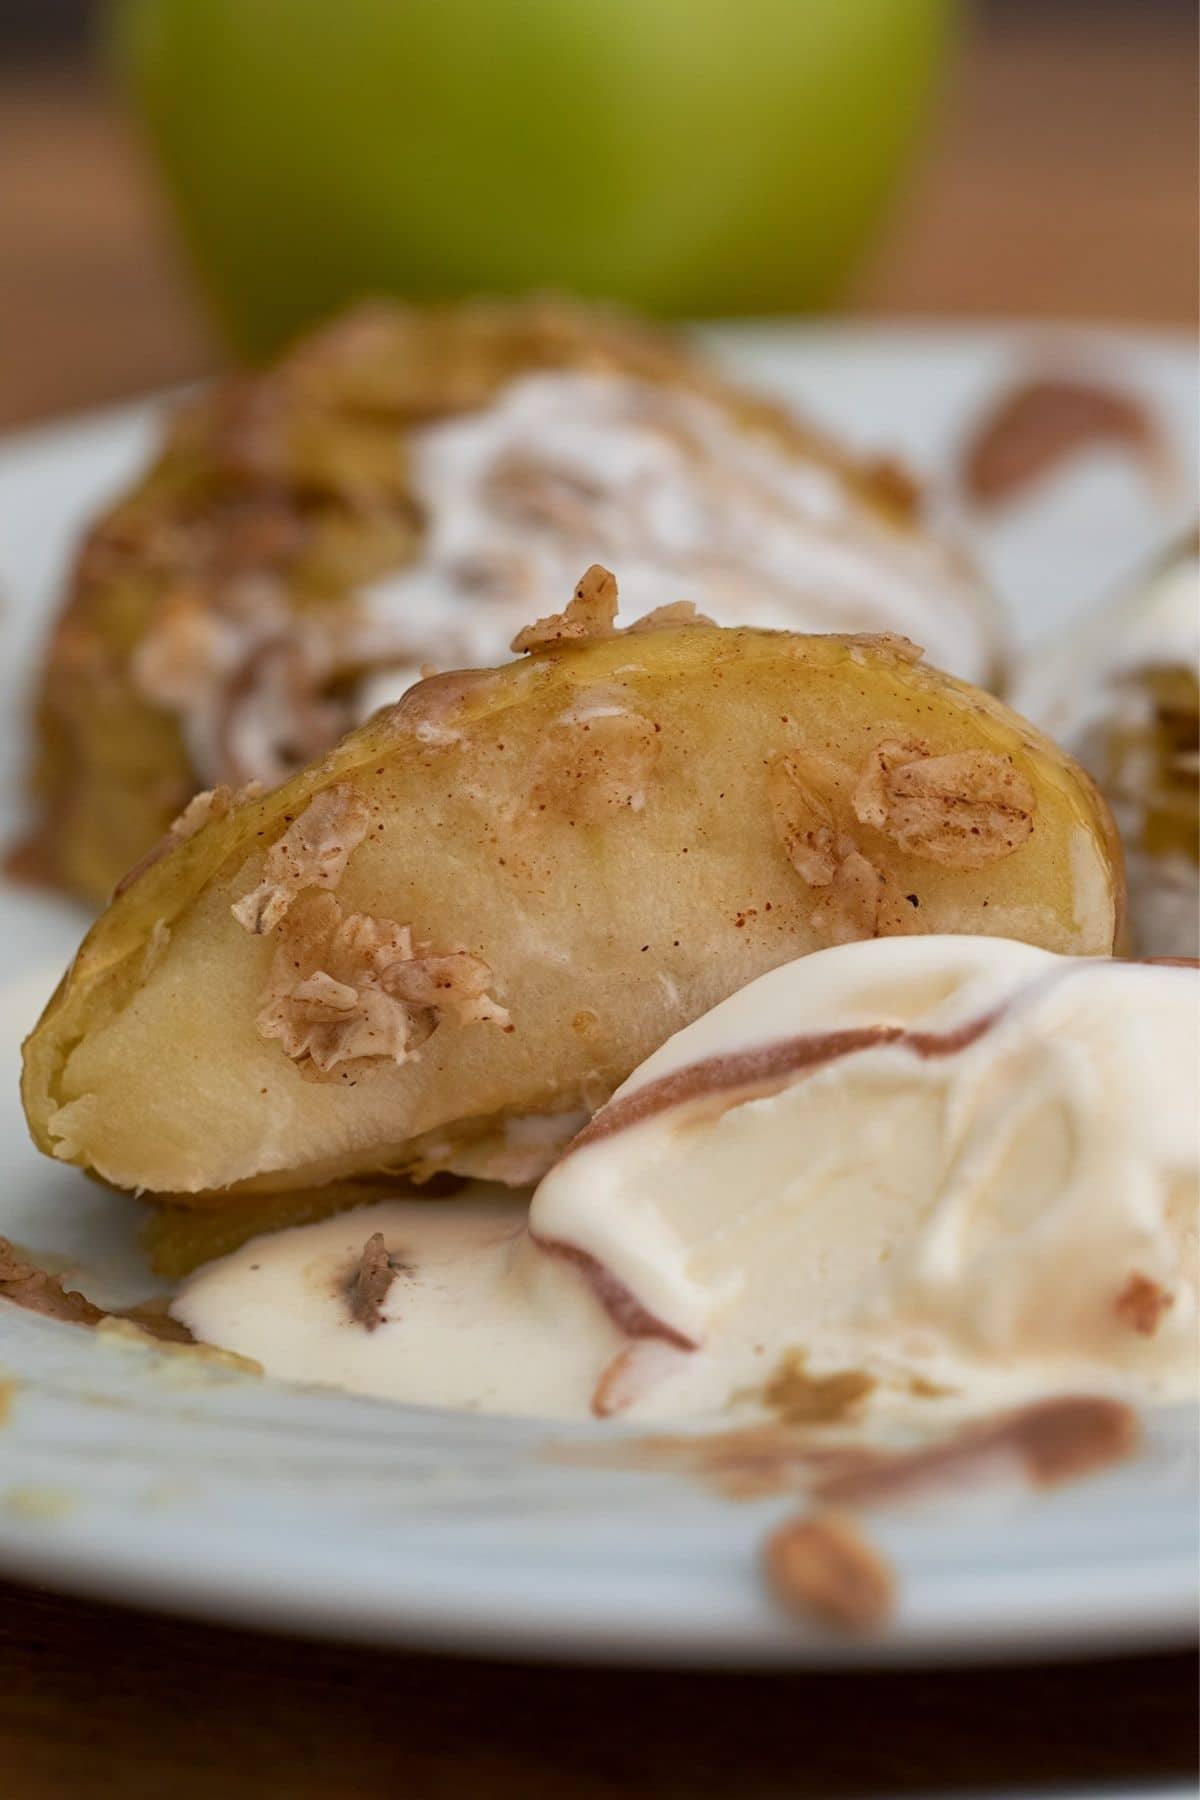 Side of baked apple on top of ice cream